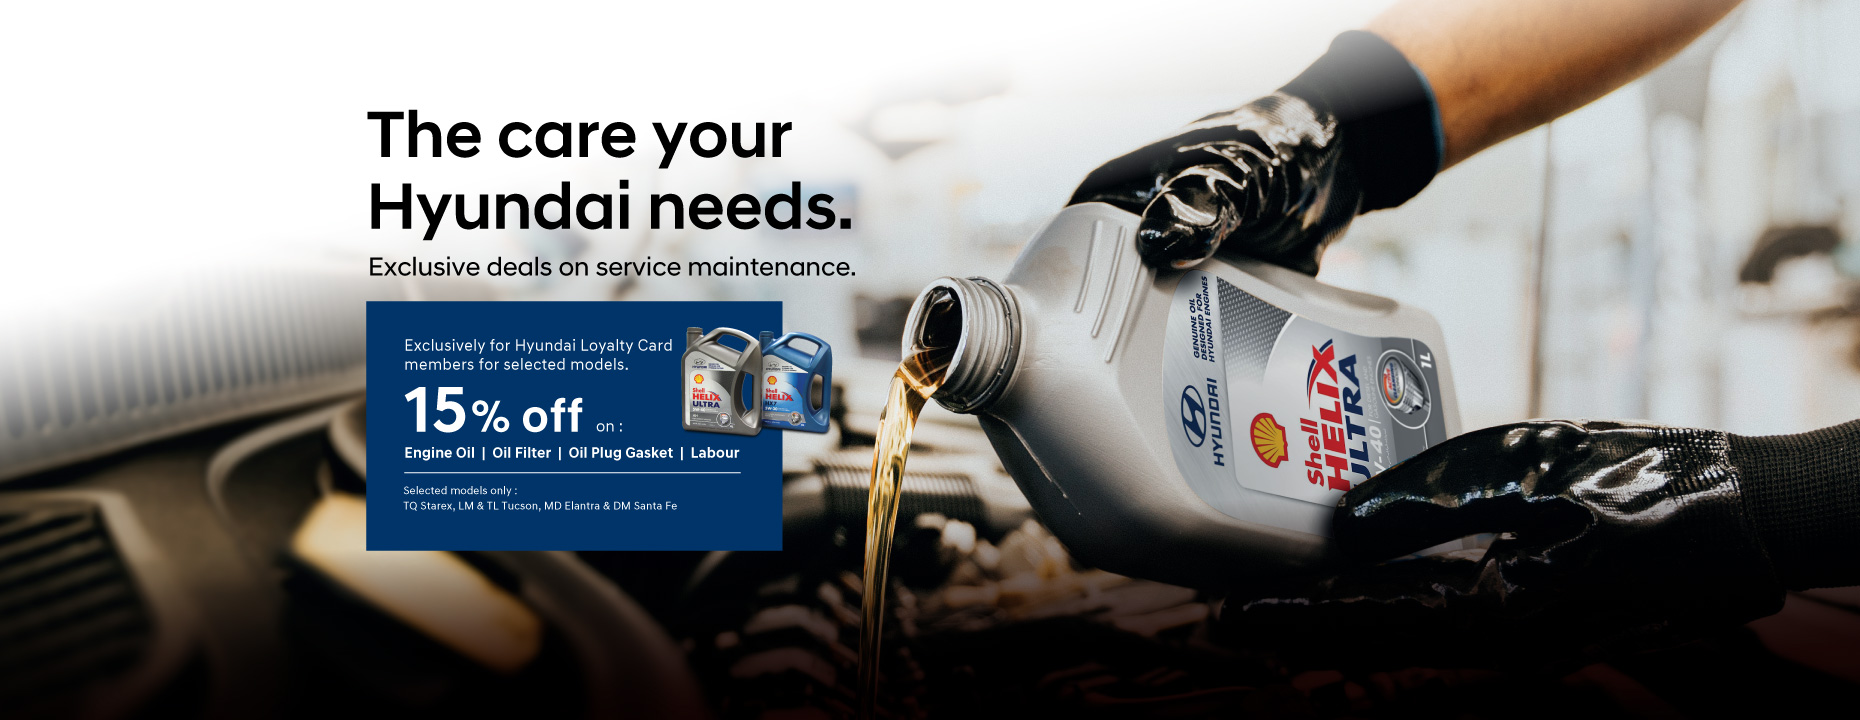 The care your Hyundai needs. Exclusive deals on service maintenance. | Exclusively for Hyundai Loyalty Card members for selected models. | 15% off on engine oil, oil filter, oil plug gasket and labour. Selected models only : TQ Starex, LM & TL Tucson, MD Elantra & DM Santa Fe | Hyundai Malaysia Promotion. Terms & conditions apply.